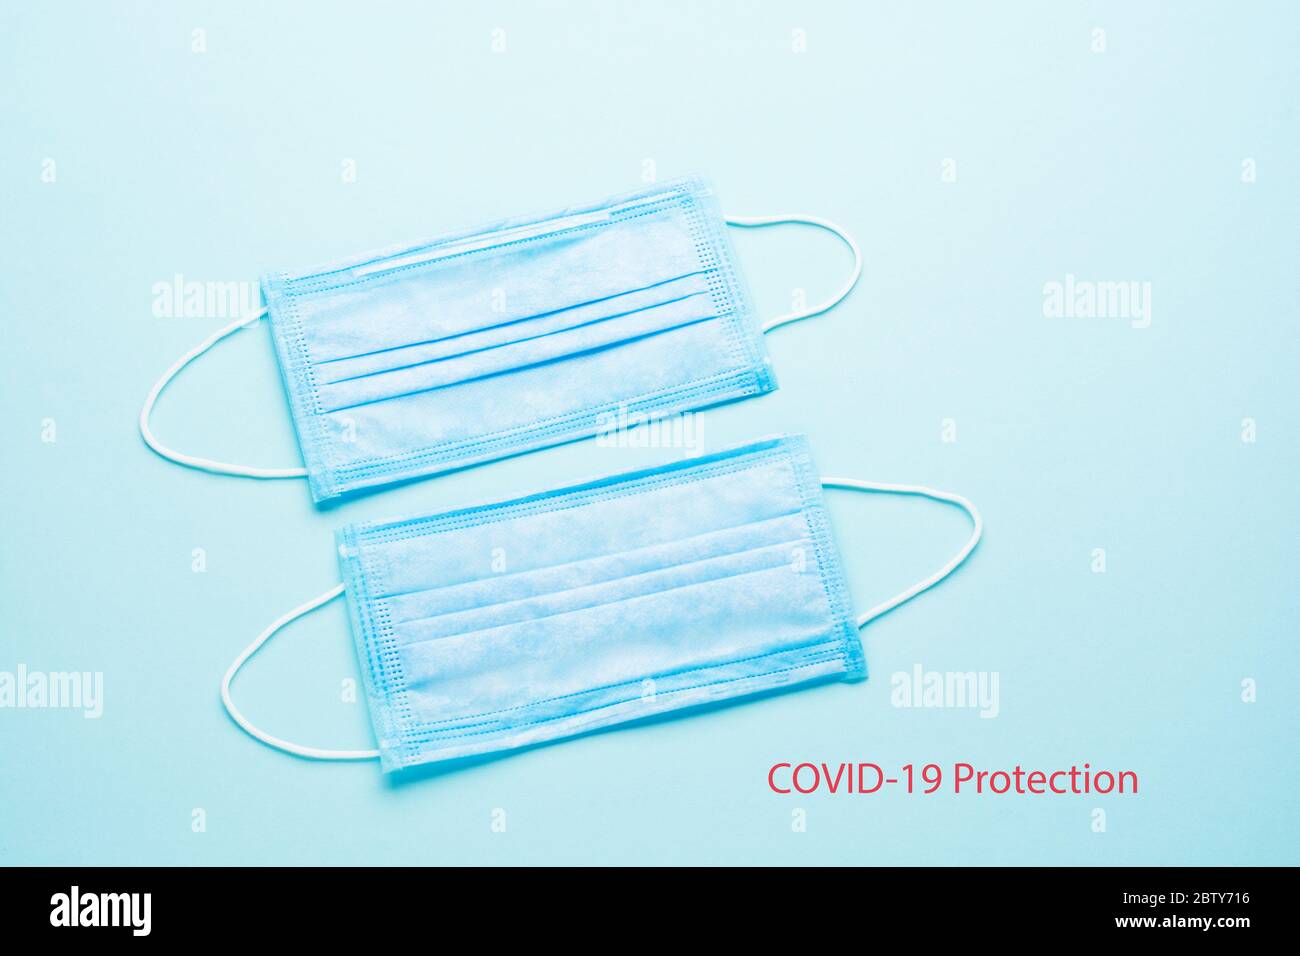 Blue Medical Disposable Face Mask with covid-19 printed on it. Coronavirus pneumonia gets official name from WHO: COVID-19. Disposable breath filter Stock Photo